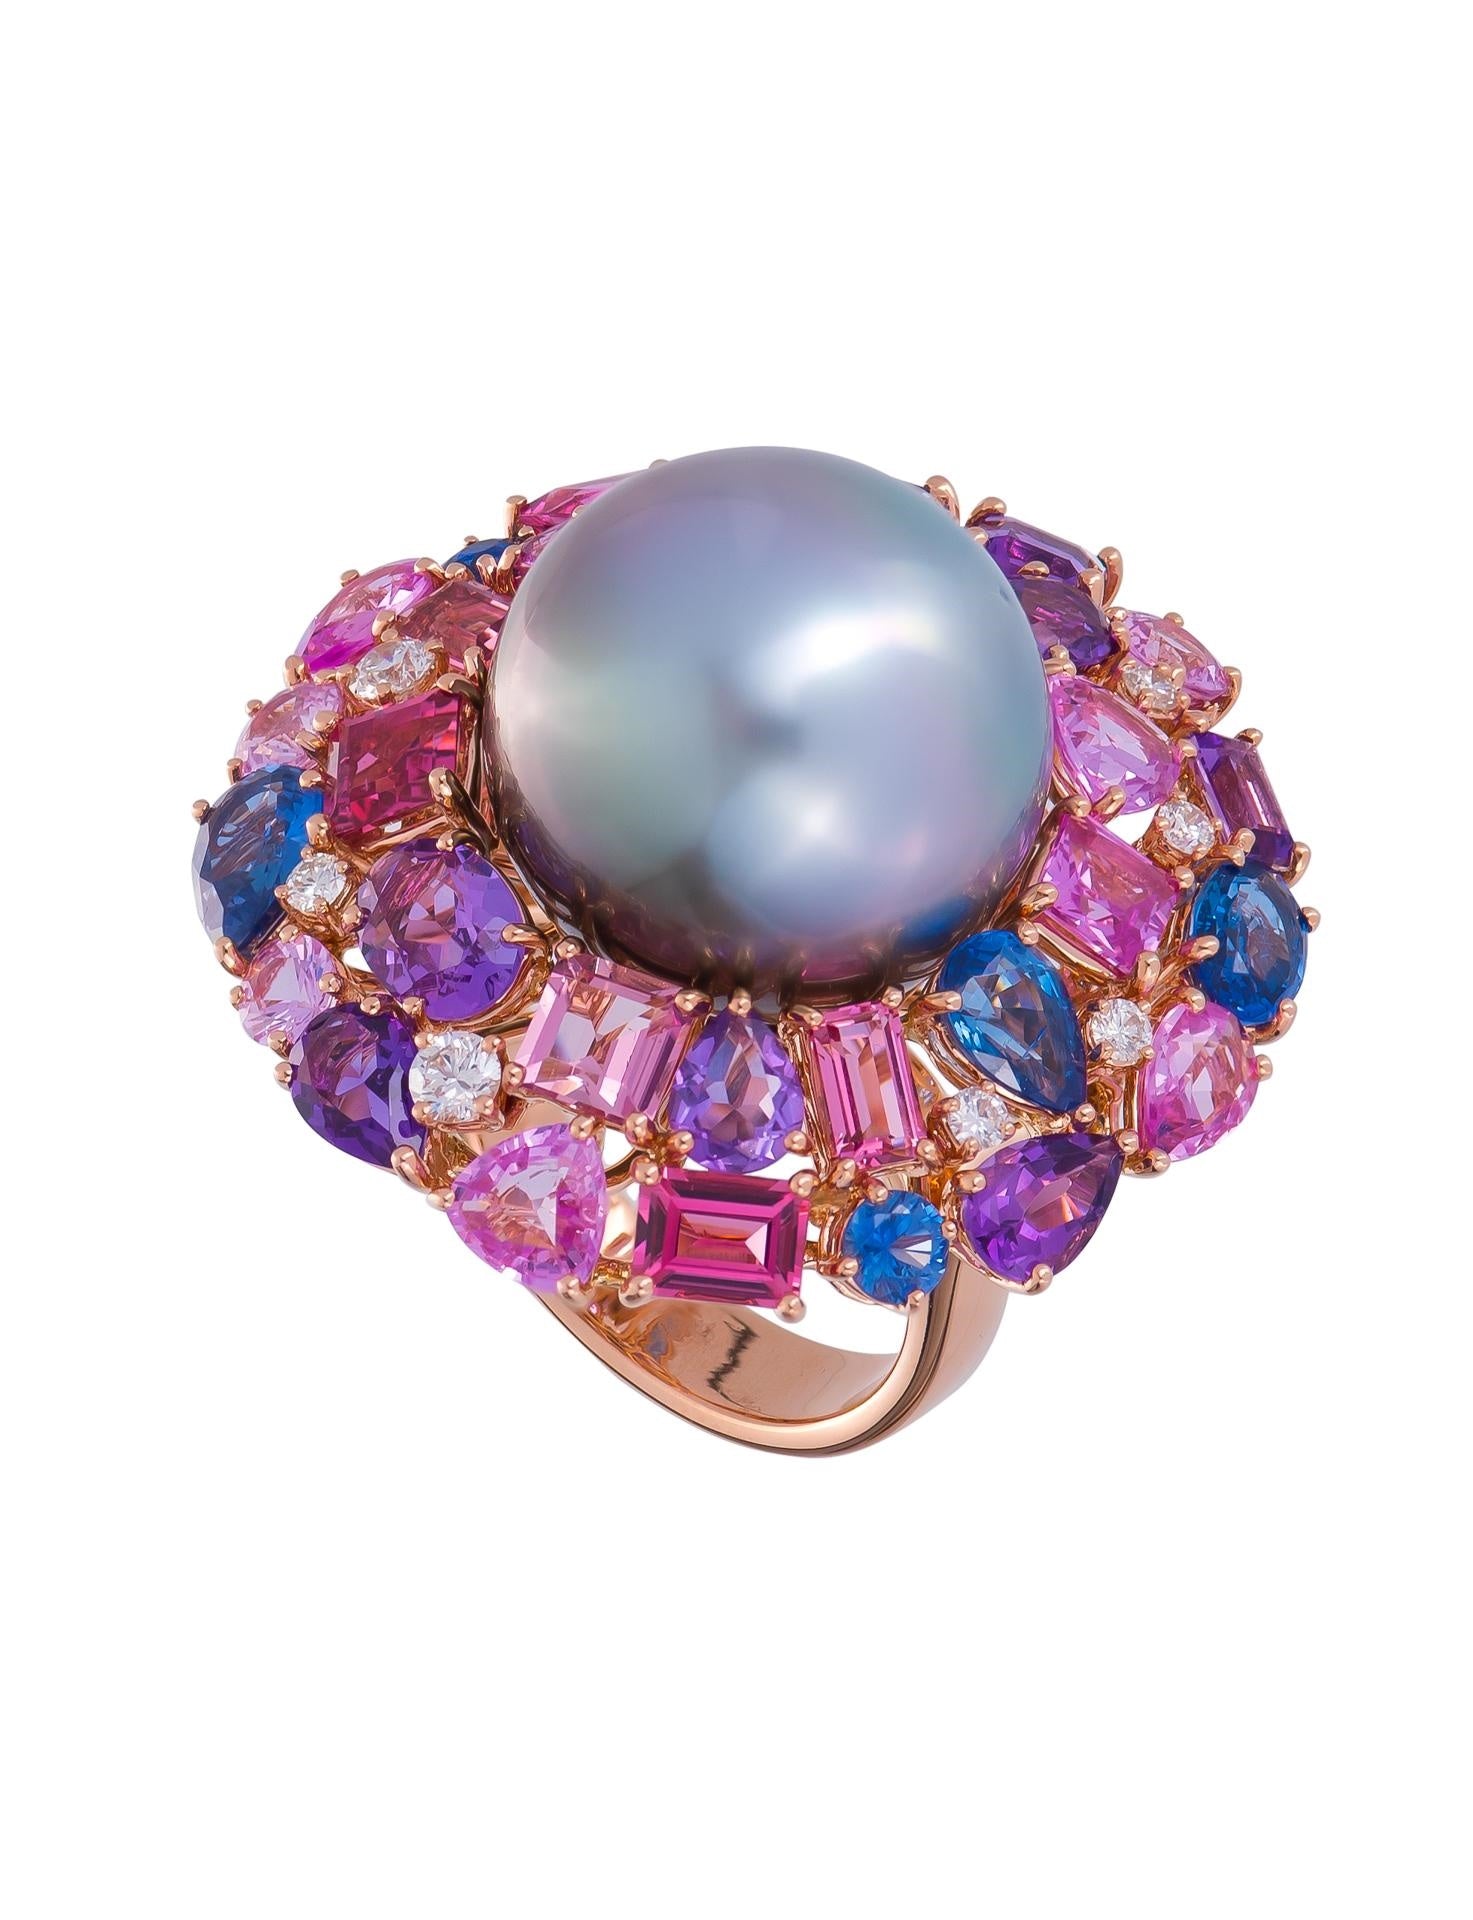 Tahitian Pearl Swirl Cocktail Ring surrounded by a myriad of gemstones, crafted in 18 karat rose gold